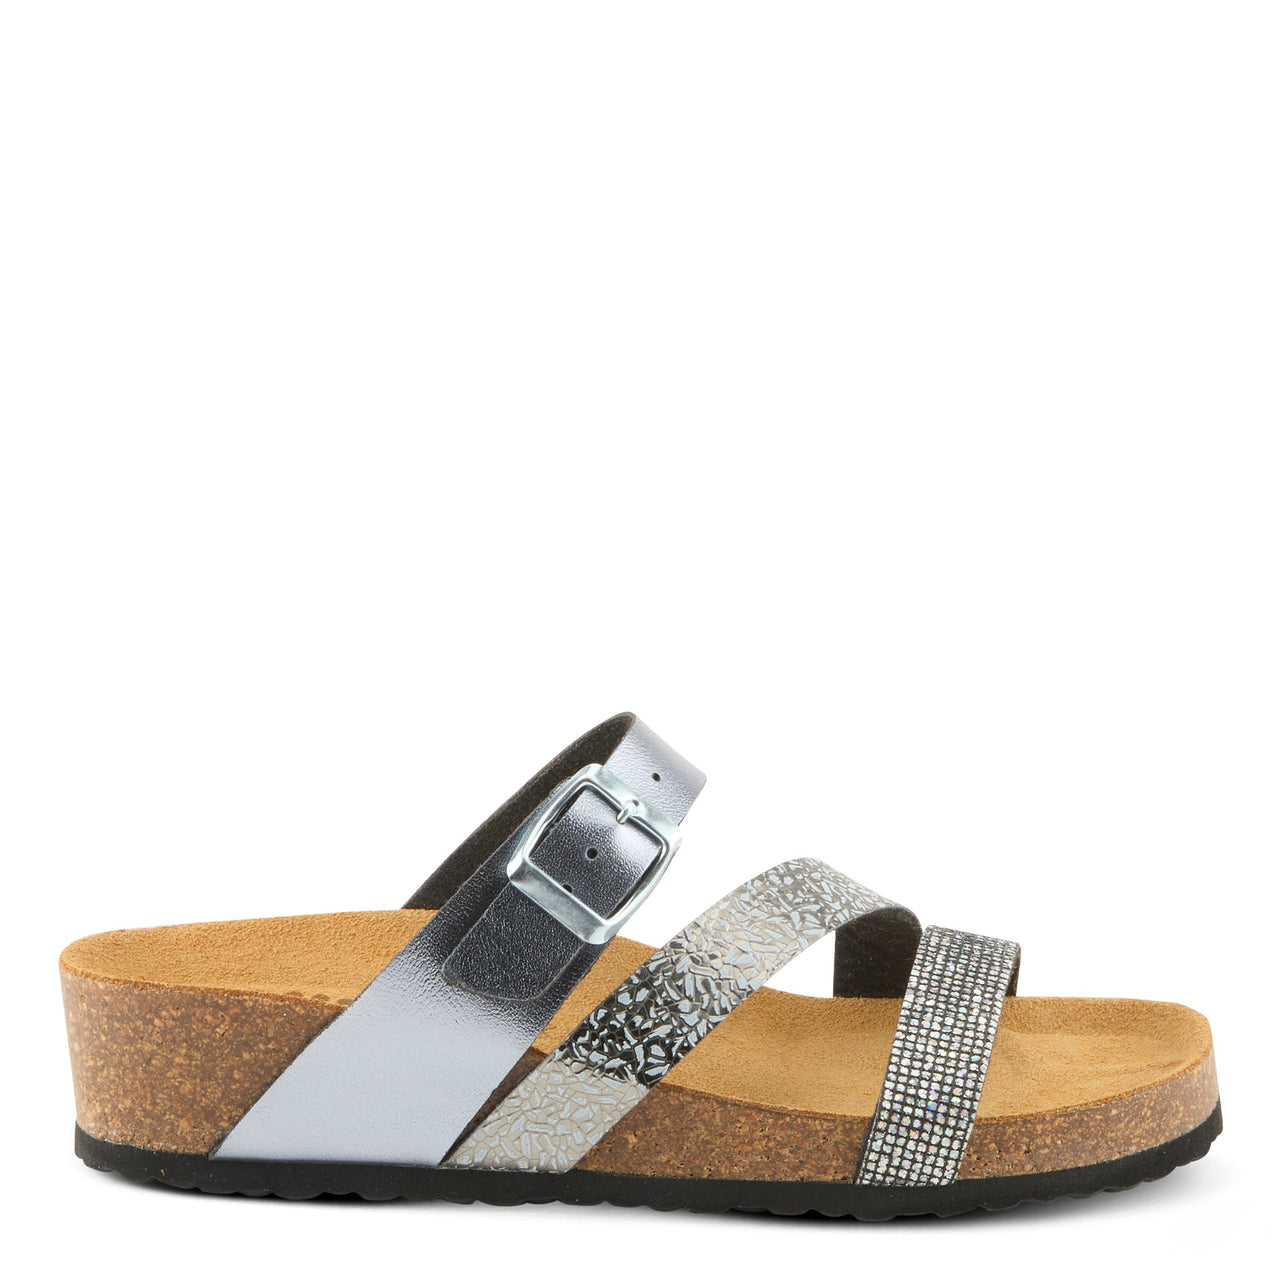 Modern Spring Step Arenall Sandals in olive green with geometric laser cutouts